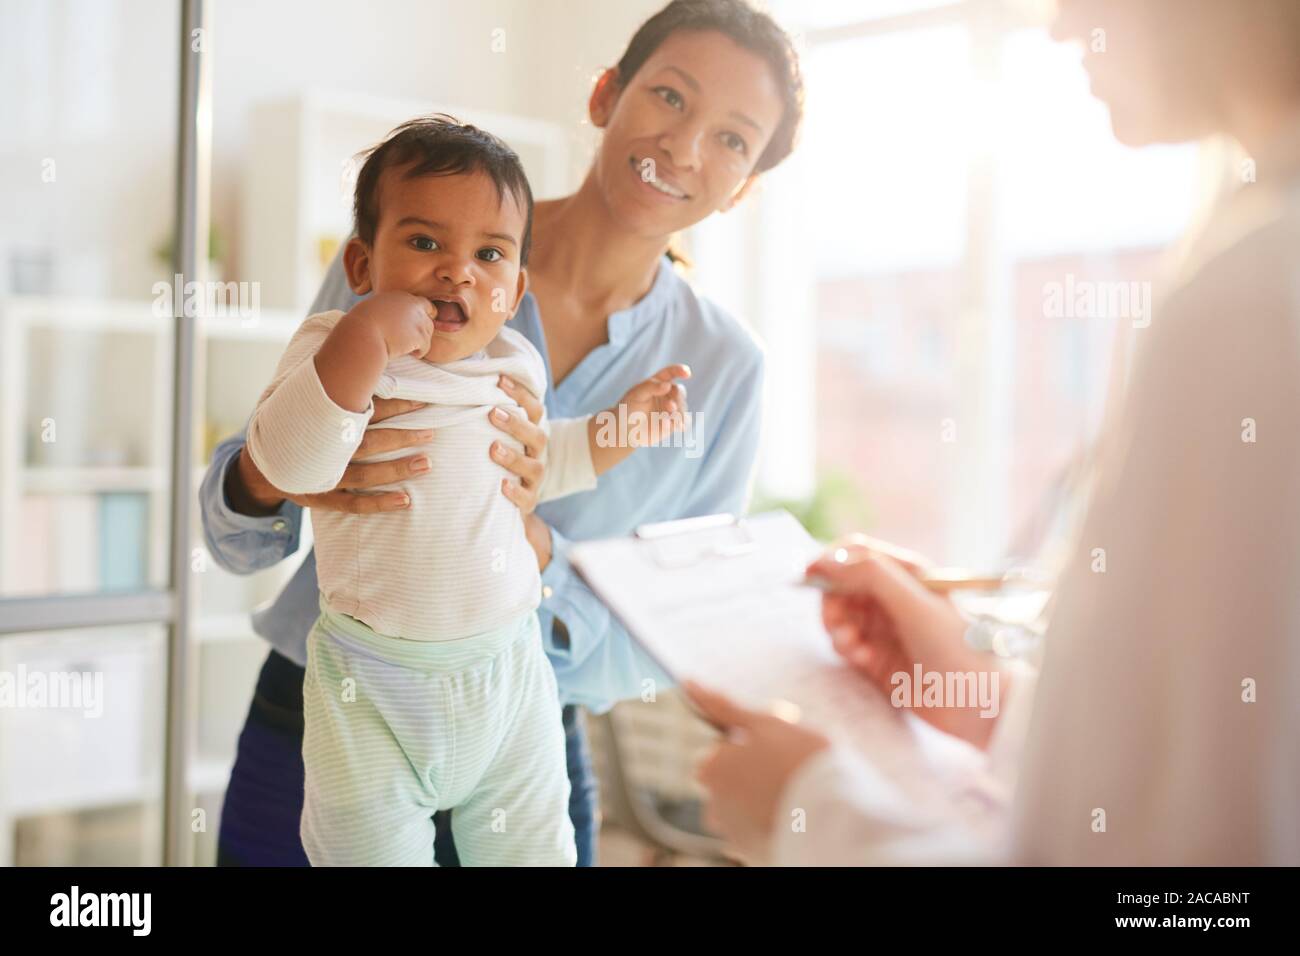 Happy young mother with little child smiling and talking to the pediatrician during medical exam at hospital Stock Photo